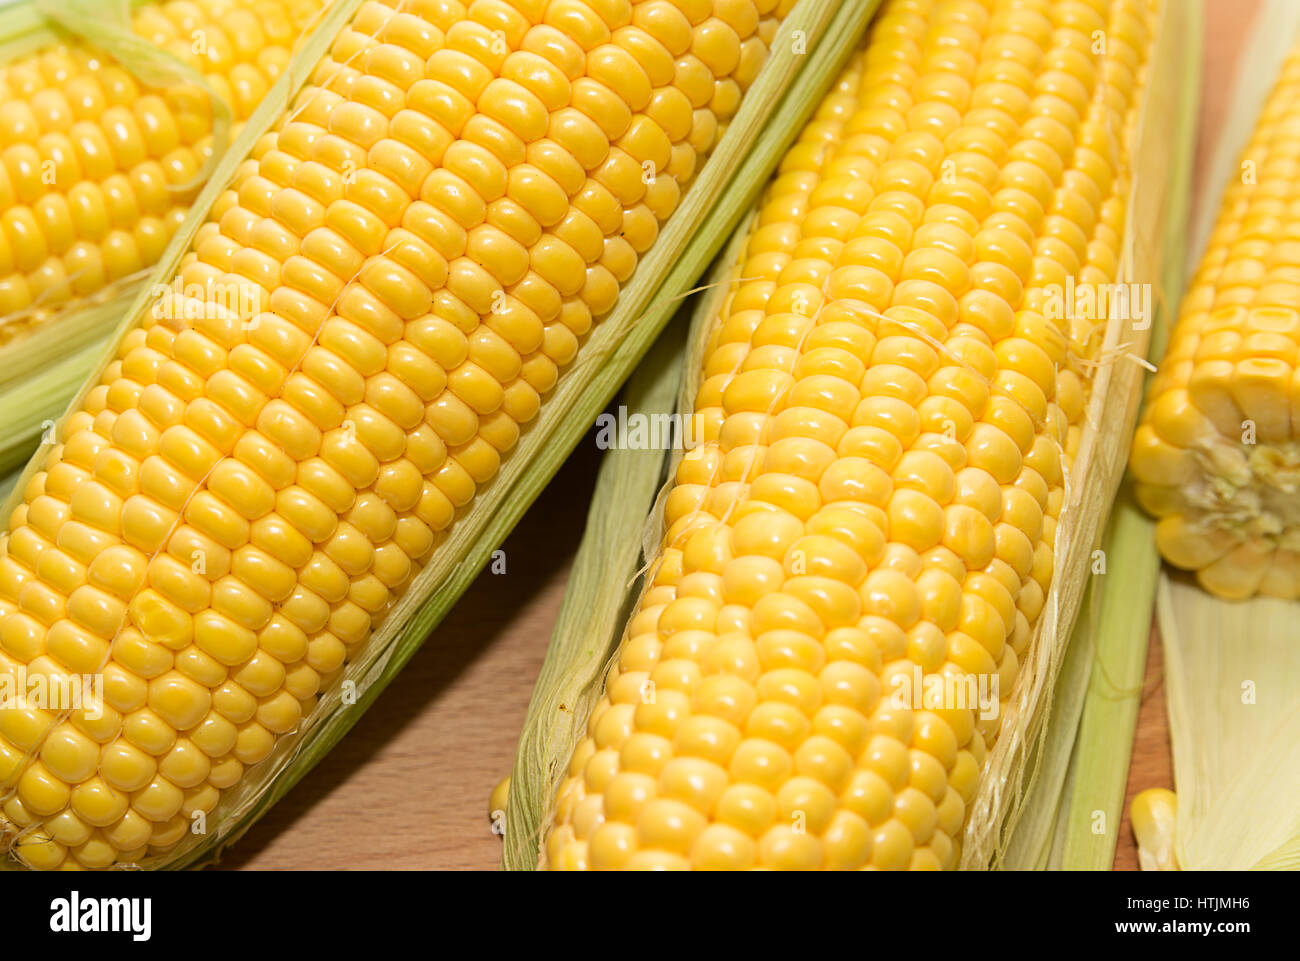 The fruits of ripe yellow corn are on the table Stock Photo